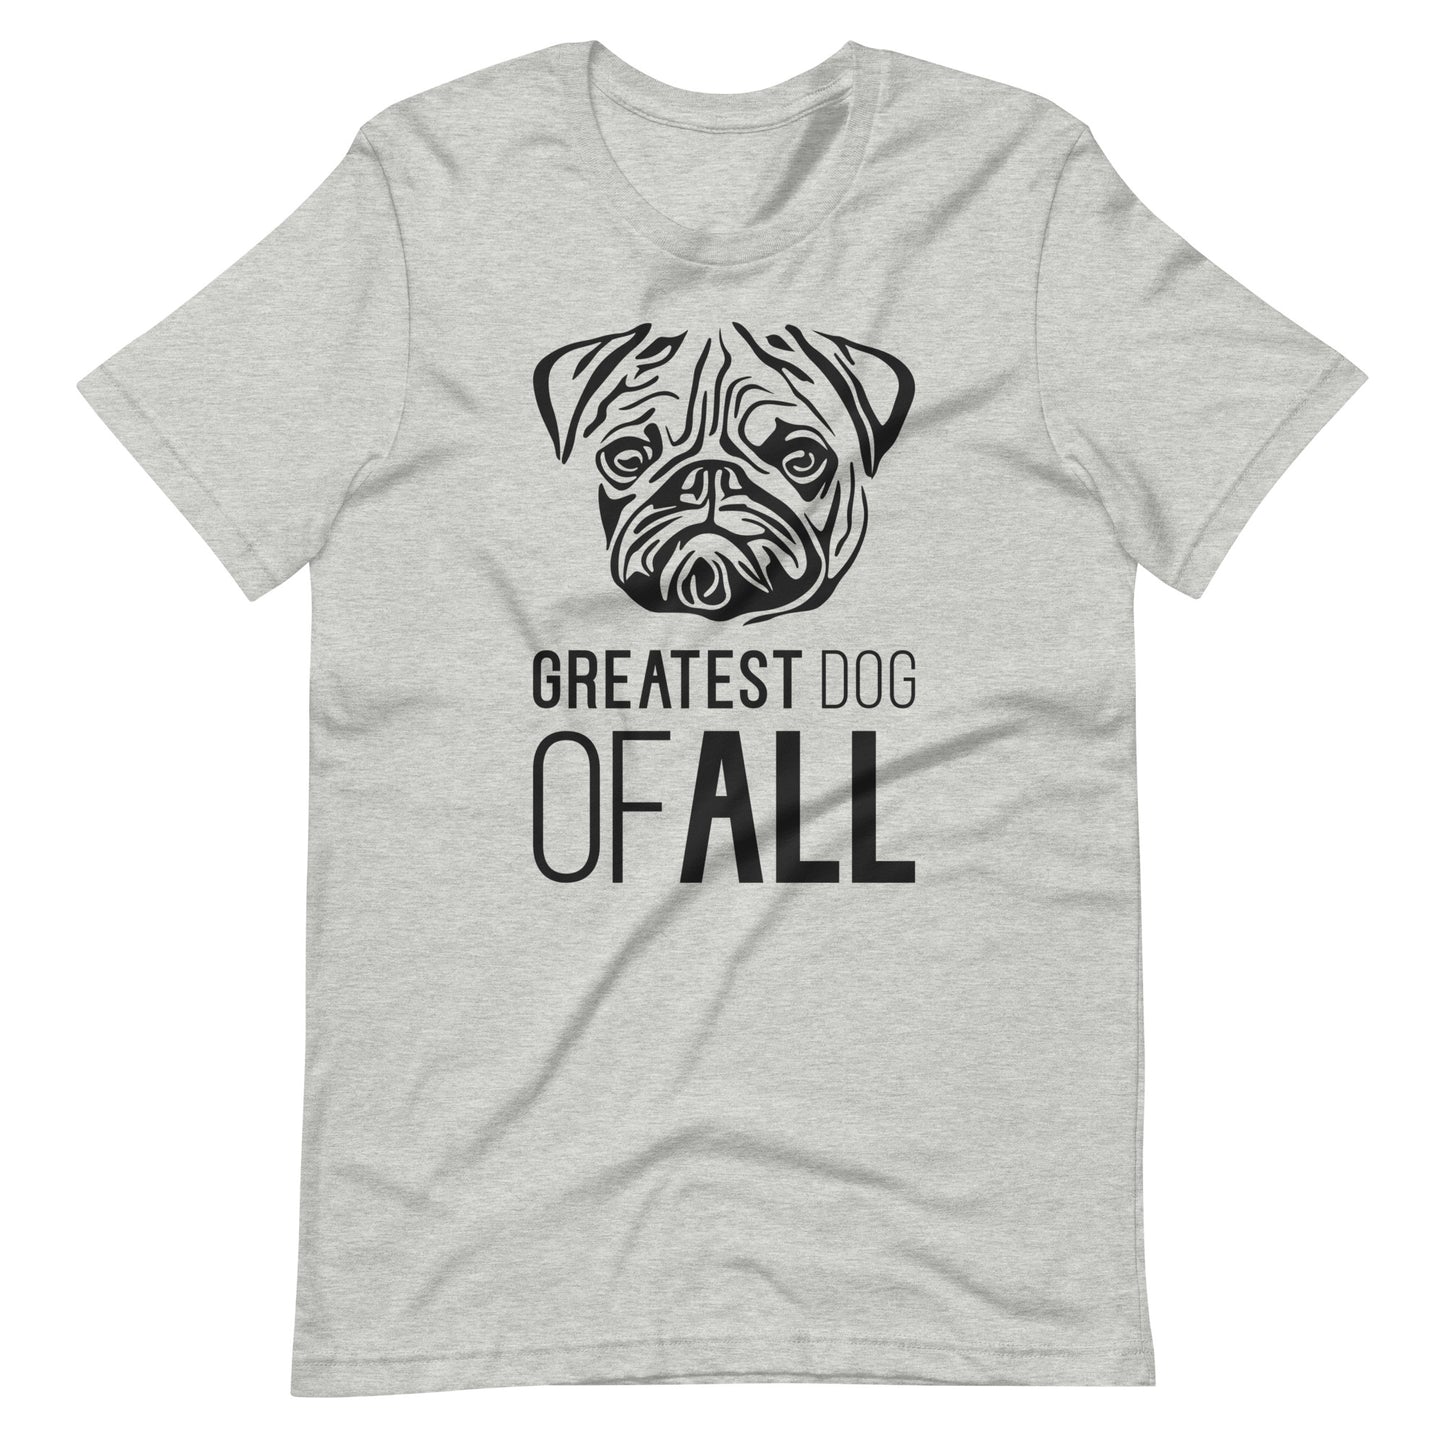 Black Pug face silhouette with Greatest Dog of All caption on unisex athletic heather t-shirt